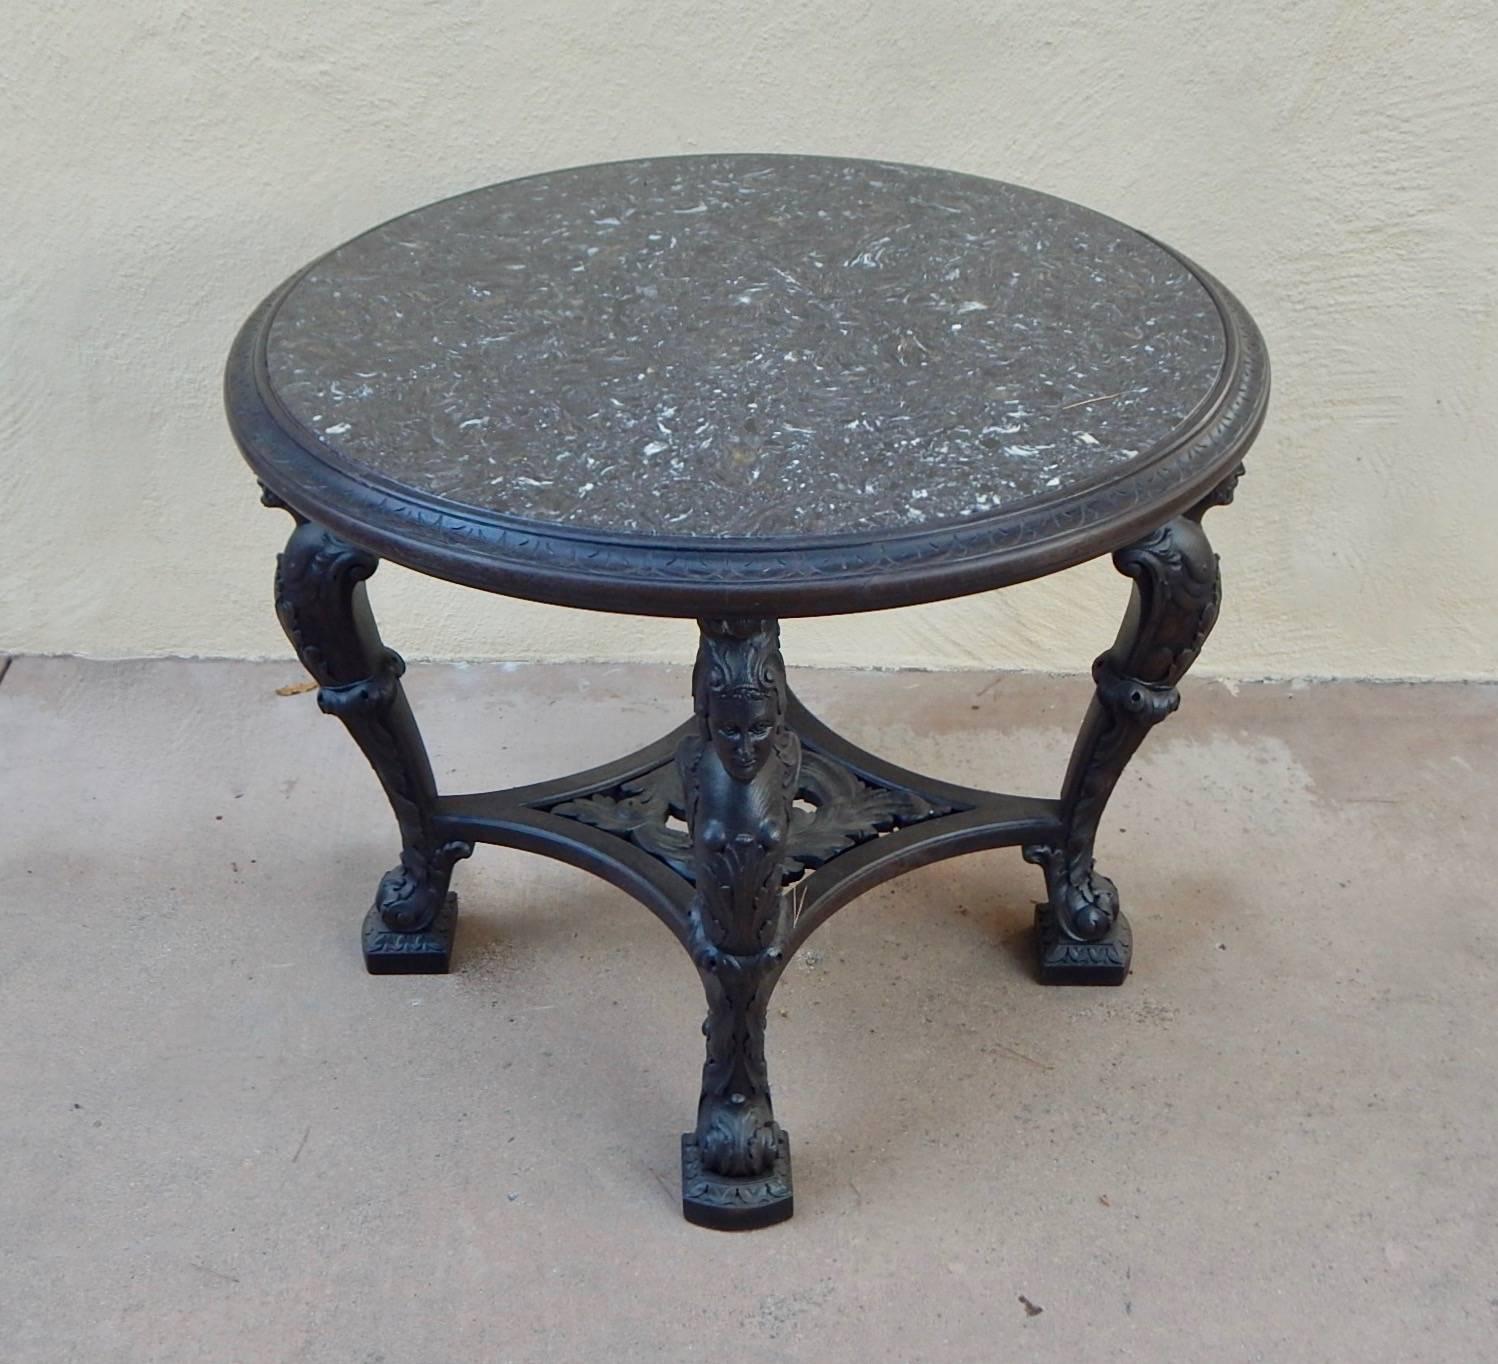 Marble Swedish Gothic Revival Table with Figural Columns and Stone Top, circa 1920 For Sale